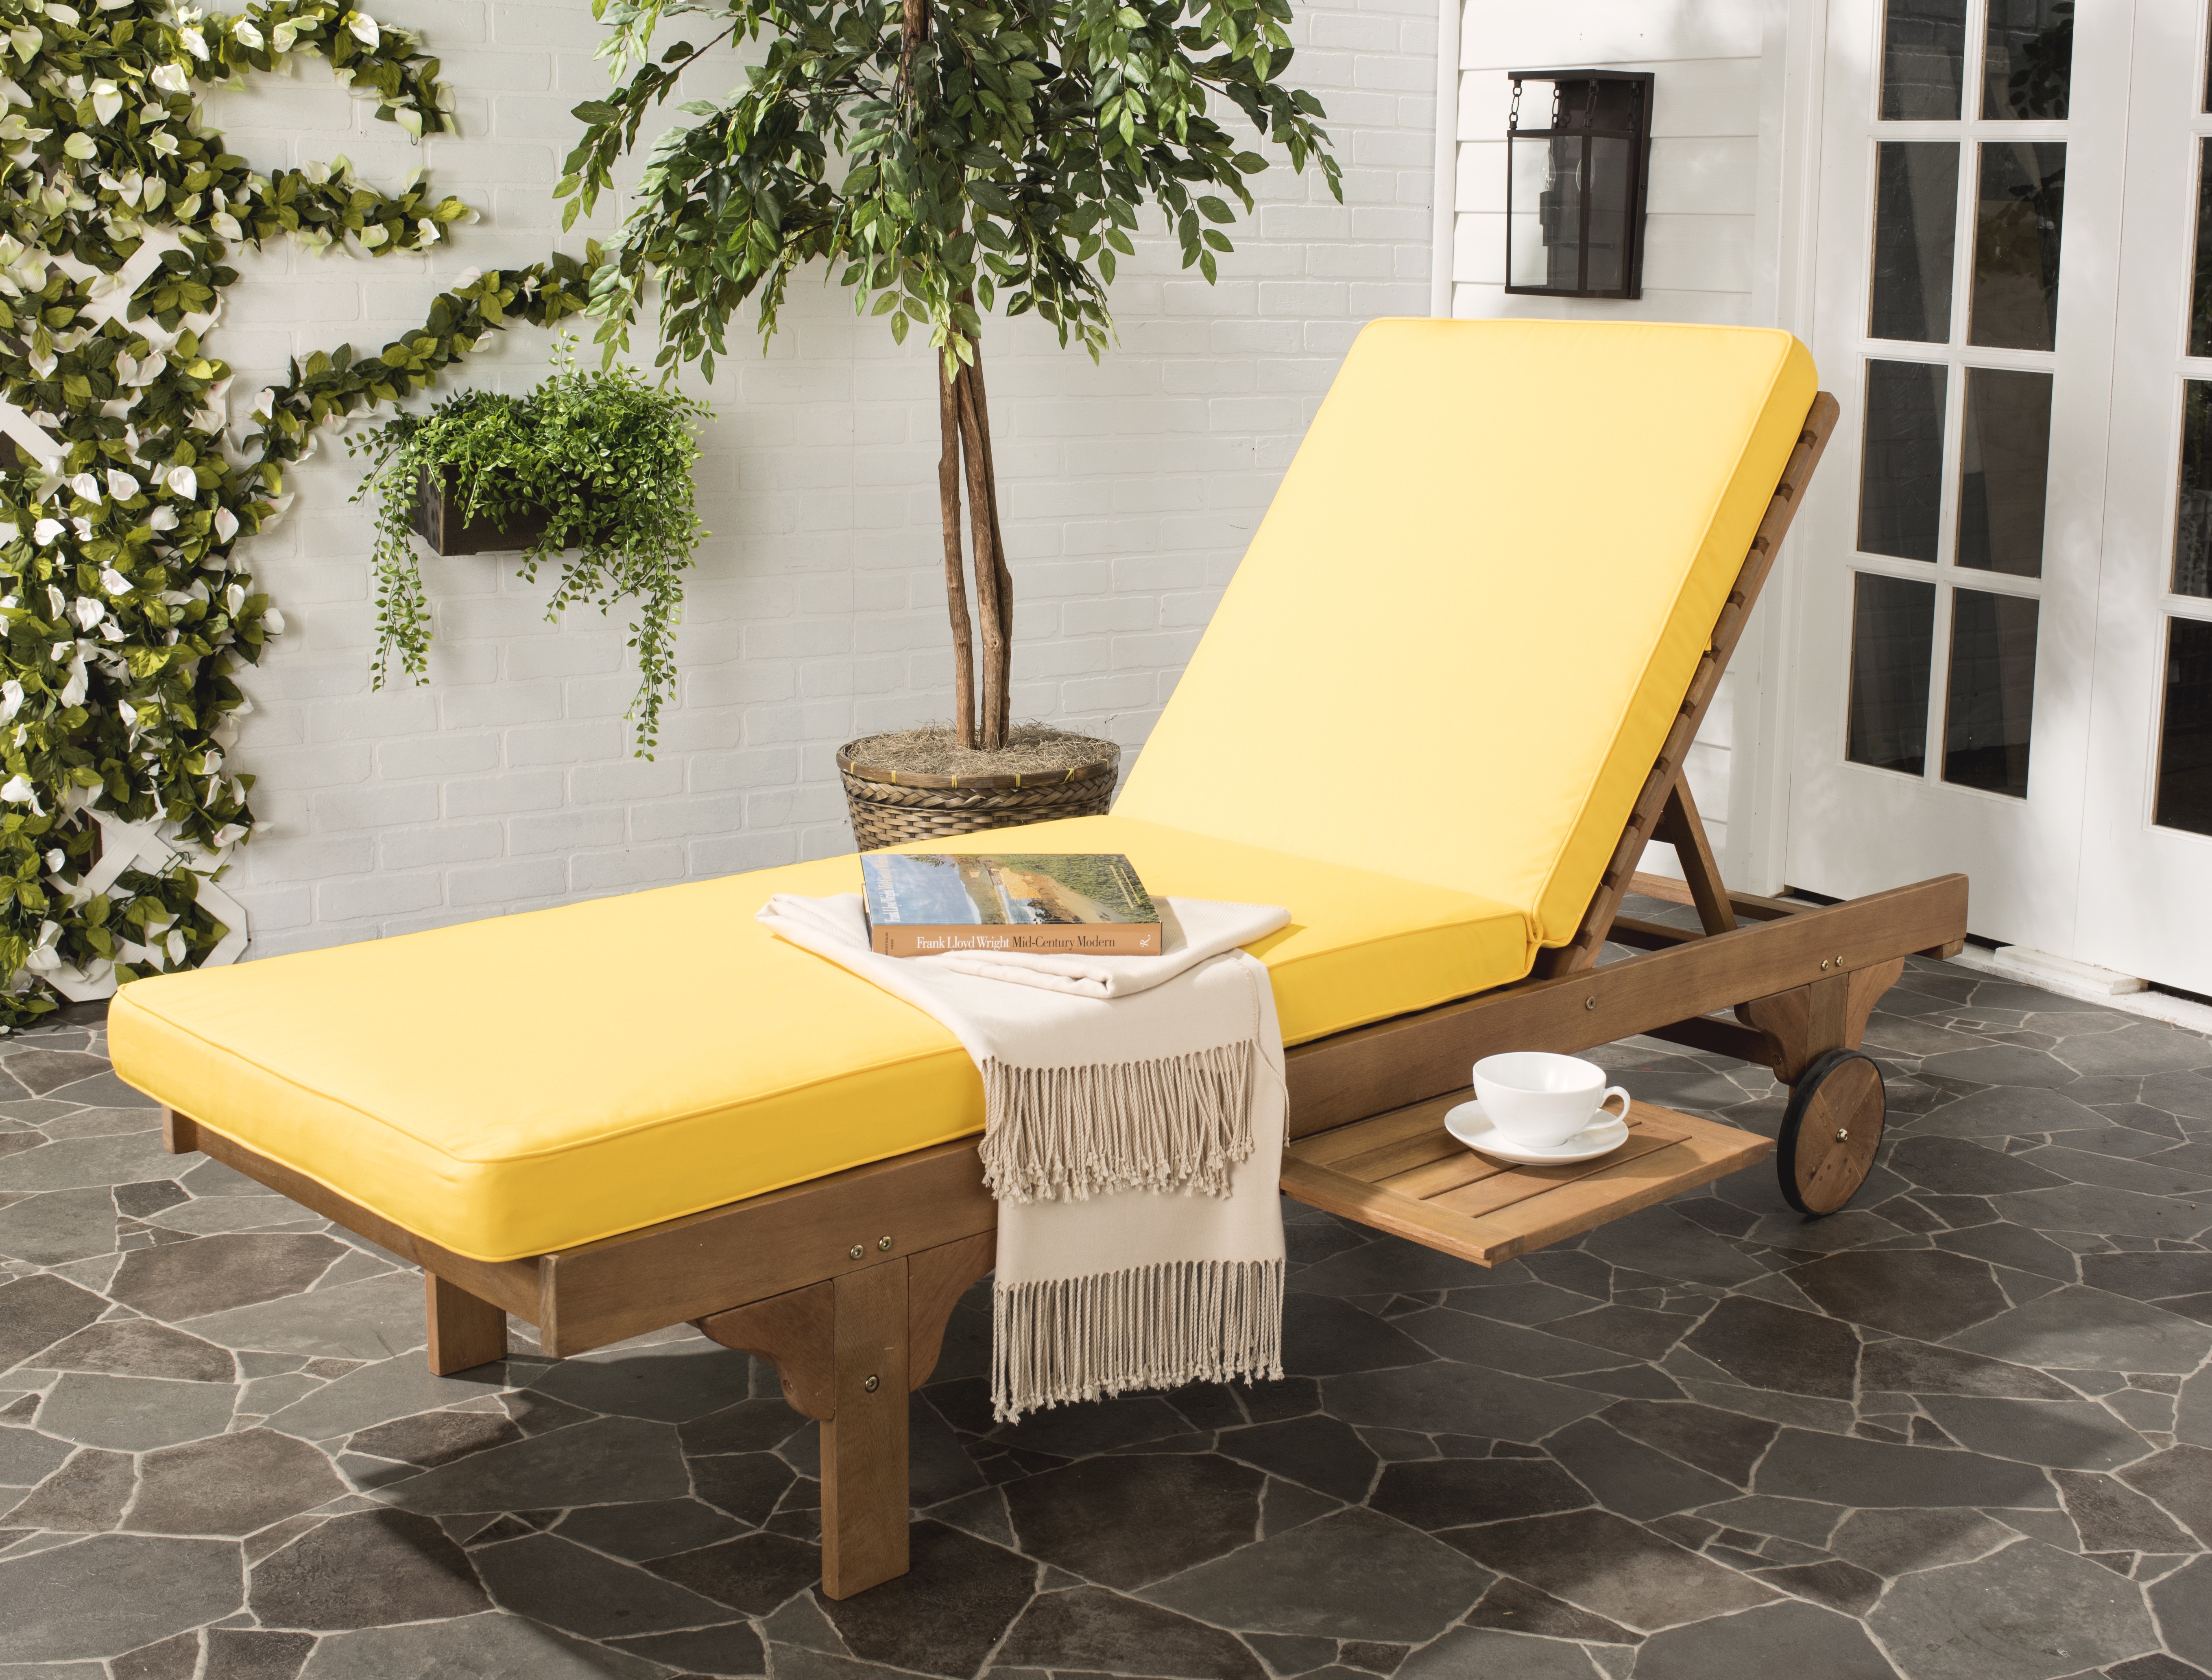 Newport Chaise Lounge Chair With Side Table - Natural/Yellow - Arlo Home - Image 5